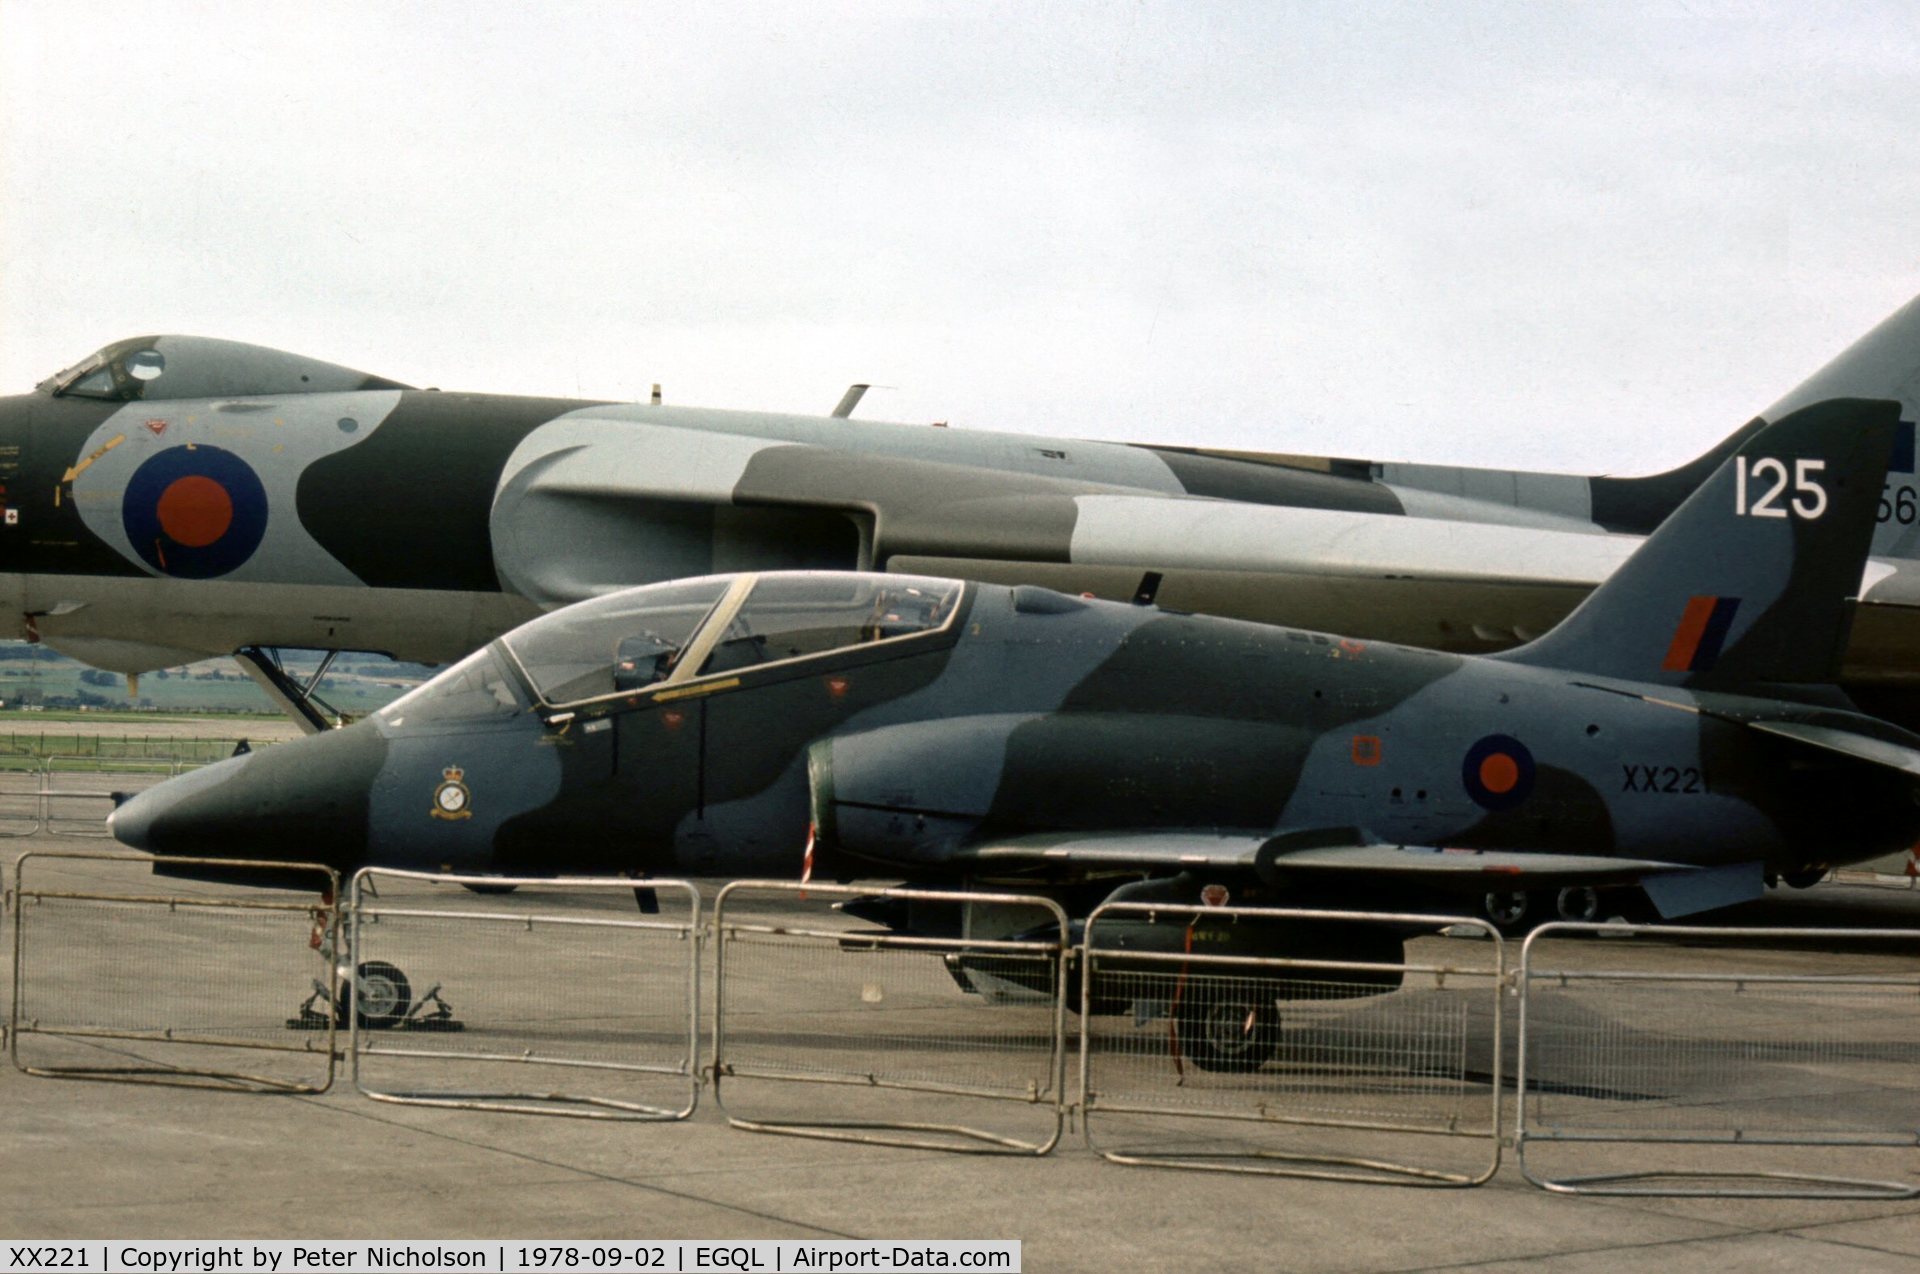 XX221, 1978 Hawker Siddeley Hawk T.1 C/N 057/312057, Hawk T.1 of the Tactical Weapons Unit on display at the 1978 Leuchars Airshow.